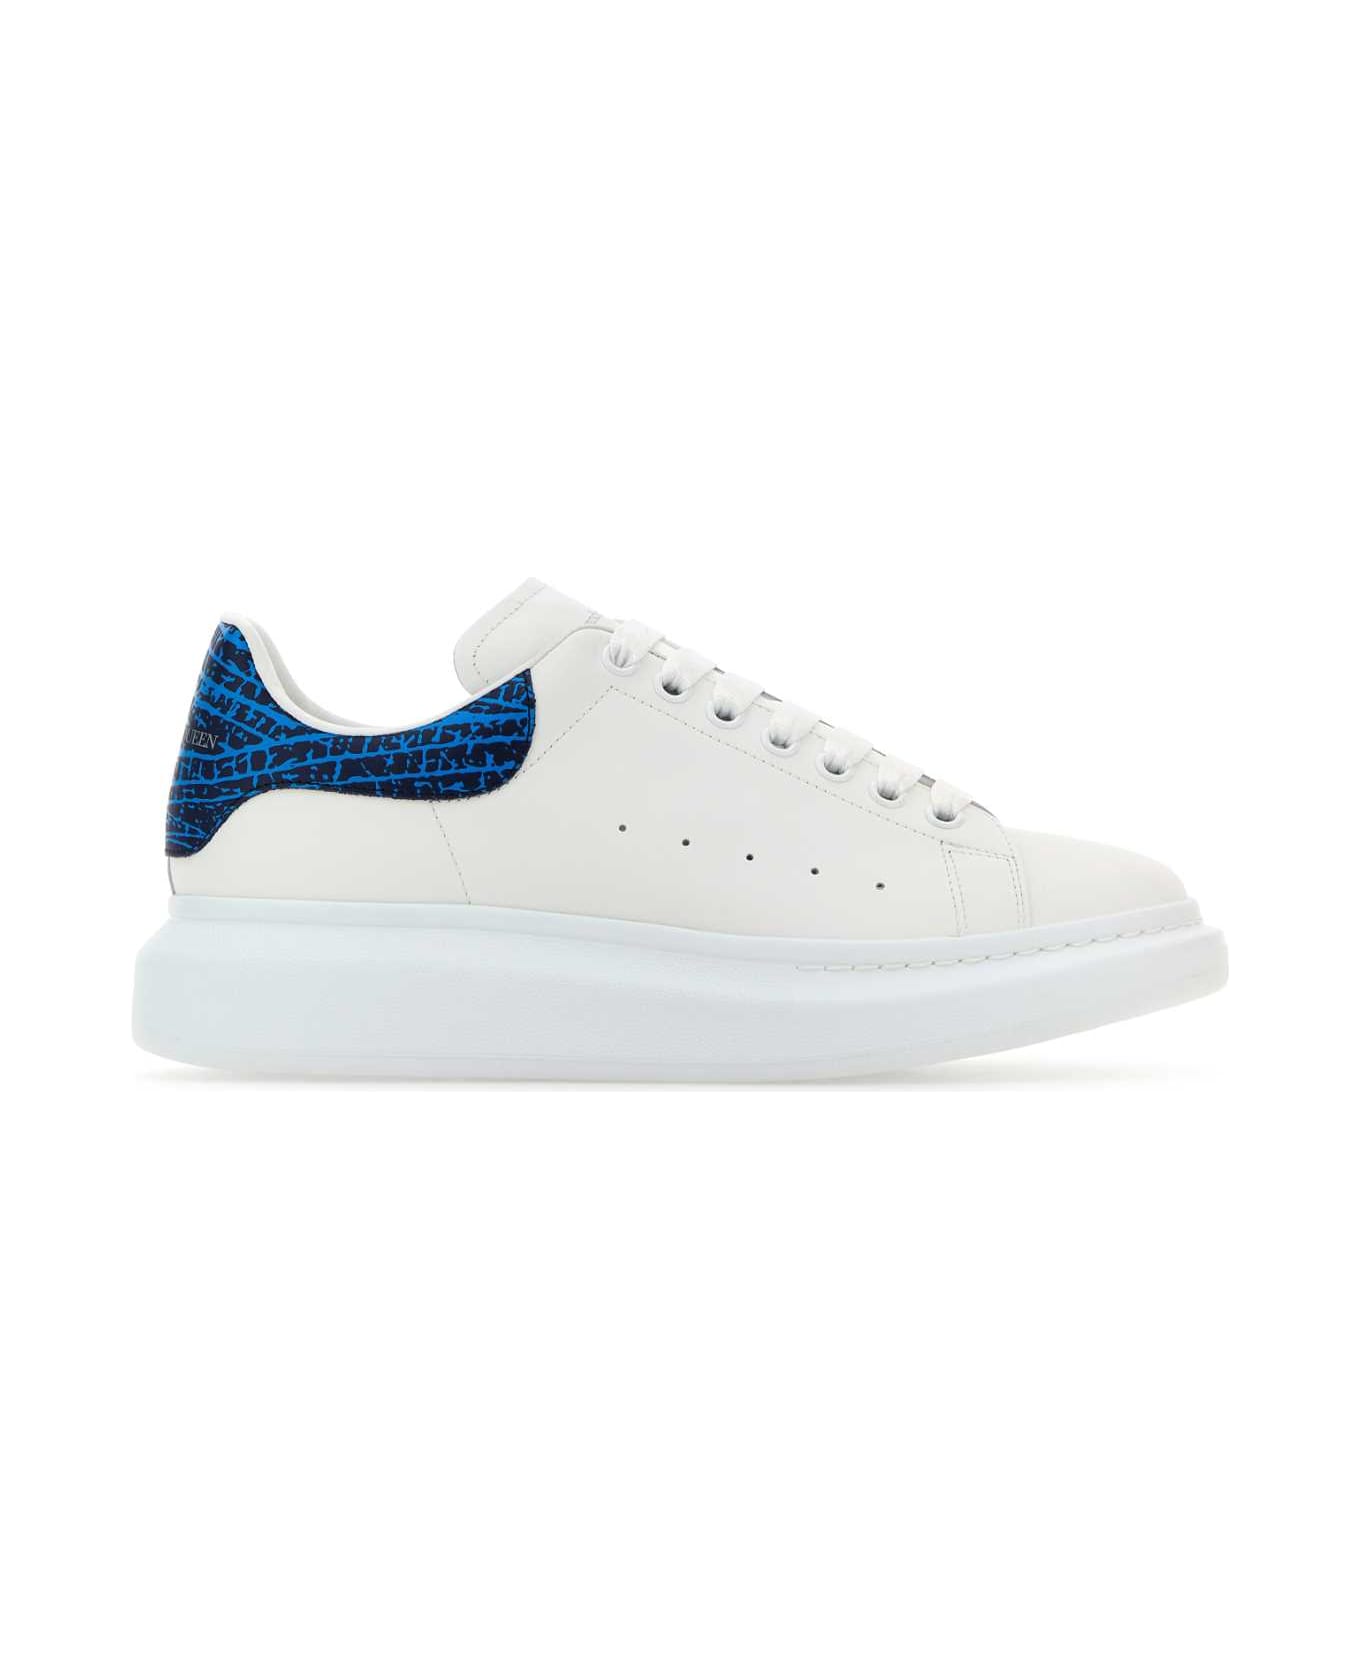 Alexander McQueen White Leather Sneakers With Printed Leather Heel - WHITELAPISBLUE